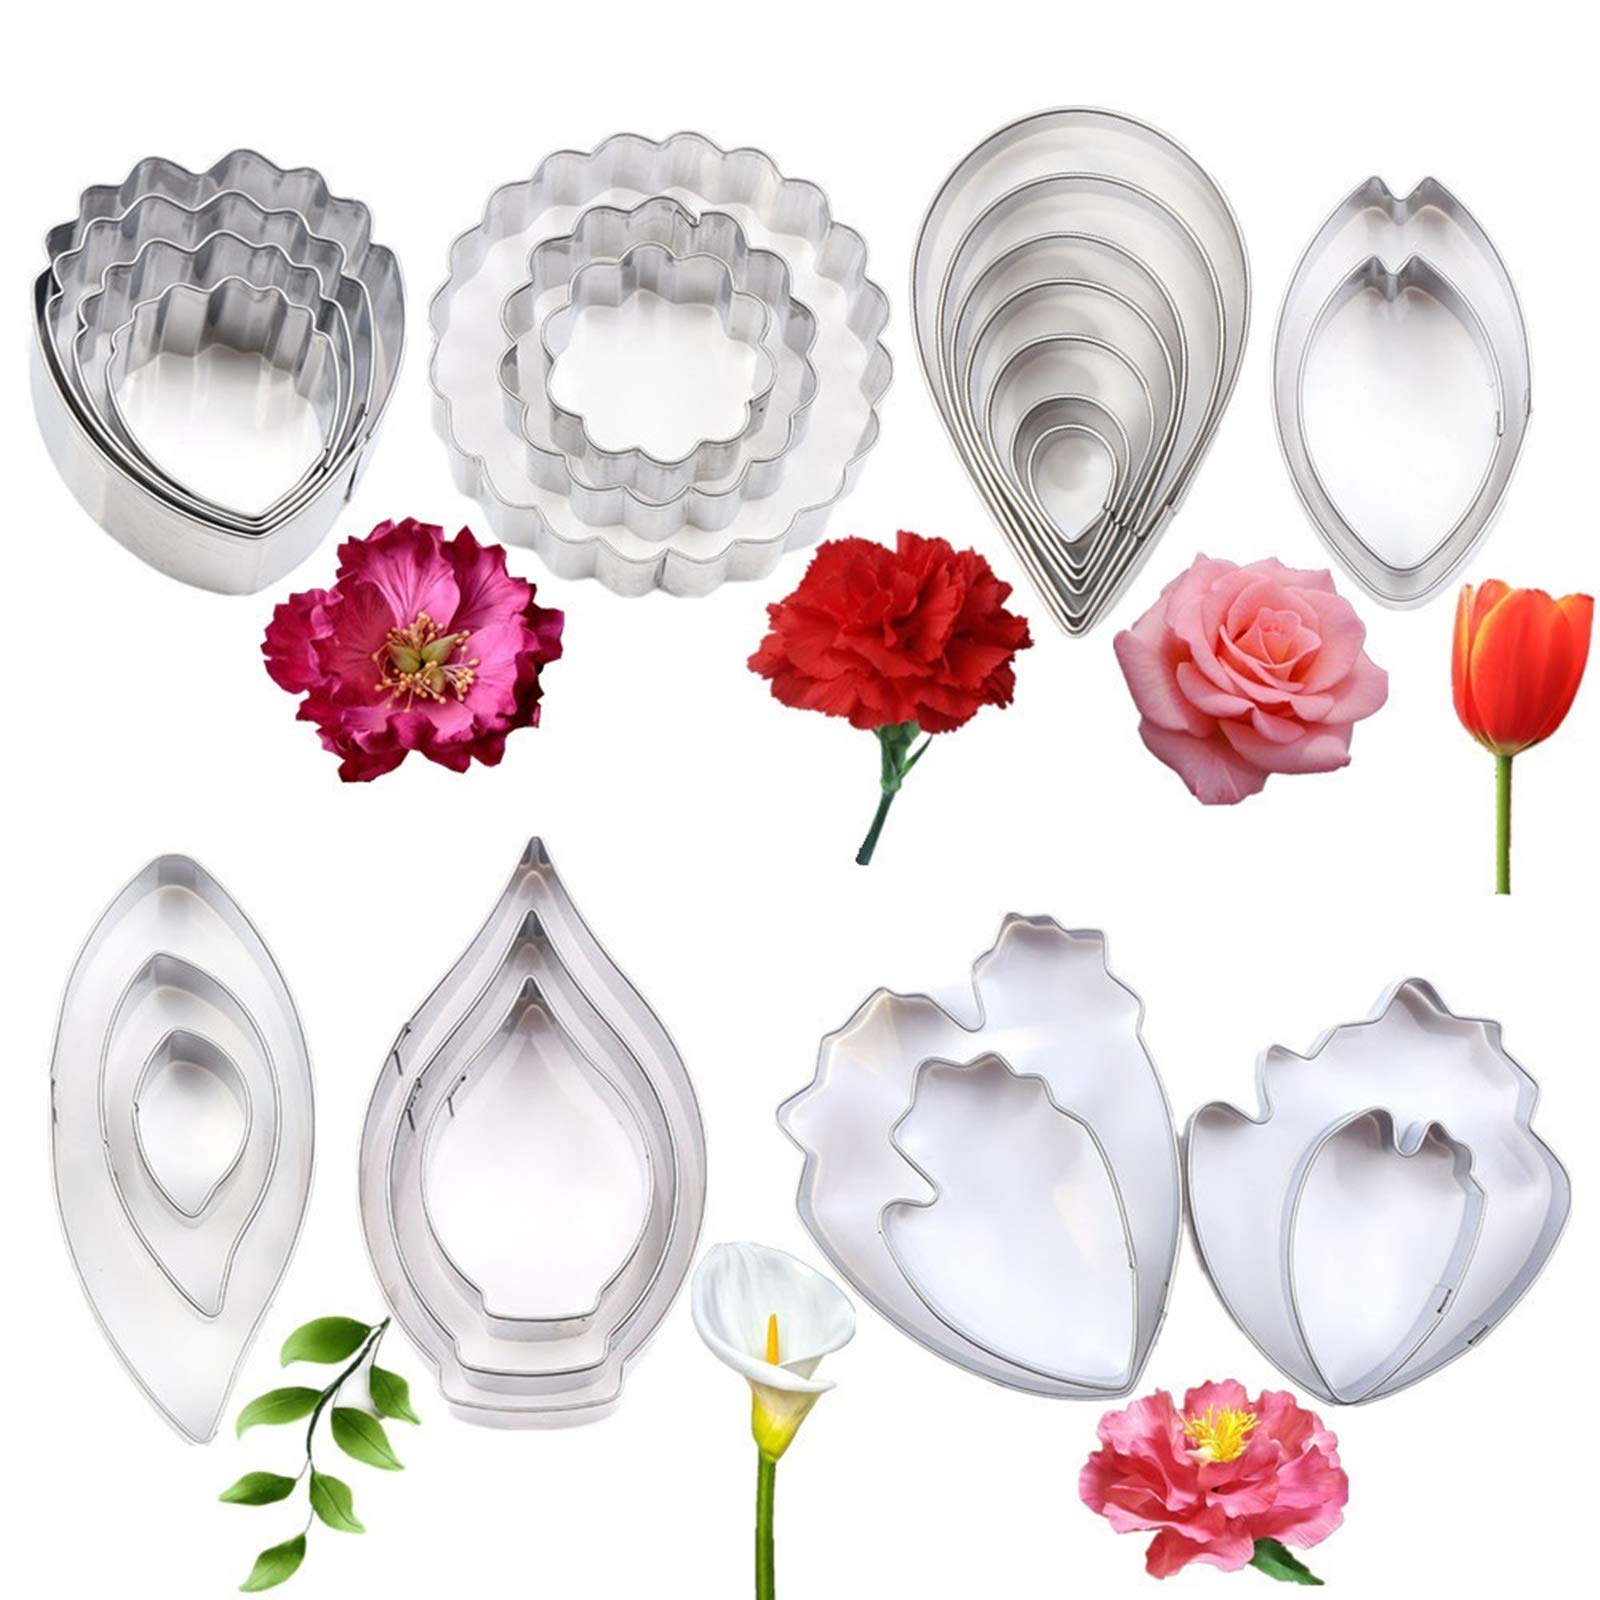 7set Stainless Steel Gum Paste Fower Cutter Set Fondant Flower Leaves Cutter Sugarcraft Cookie Cutter DIY Making Tools for Cake decorating Making Tools for Cake decorating